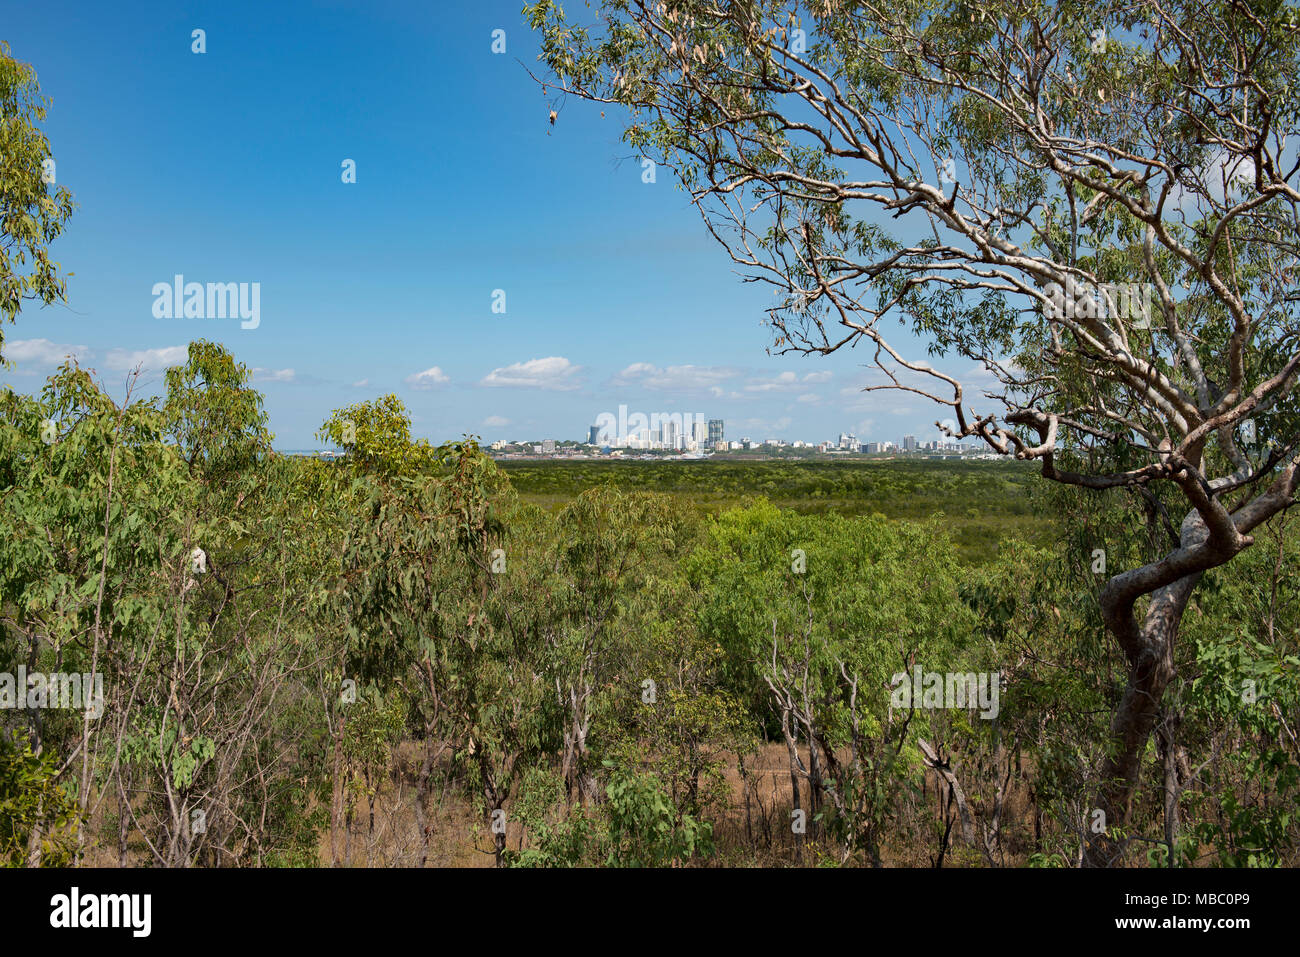 Darwin, viewed from Charles Darwin National Park, is the capital city of the Northern Territory of Australia. Stock Photo